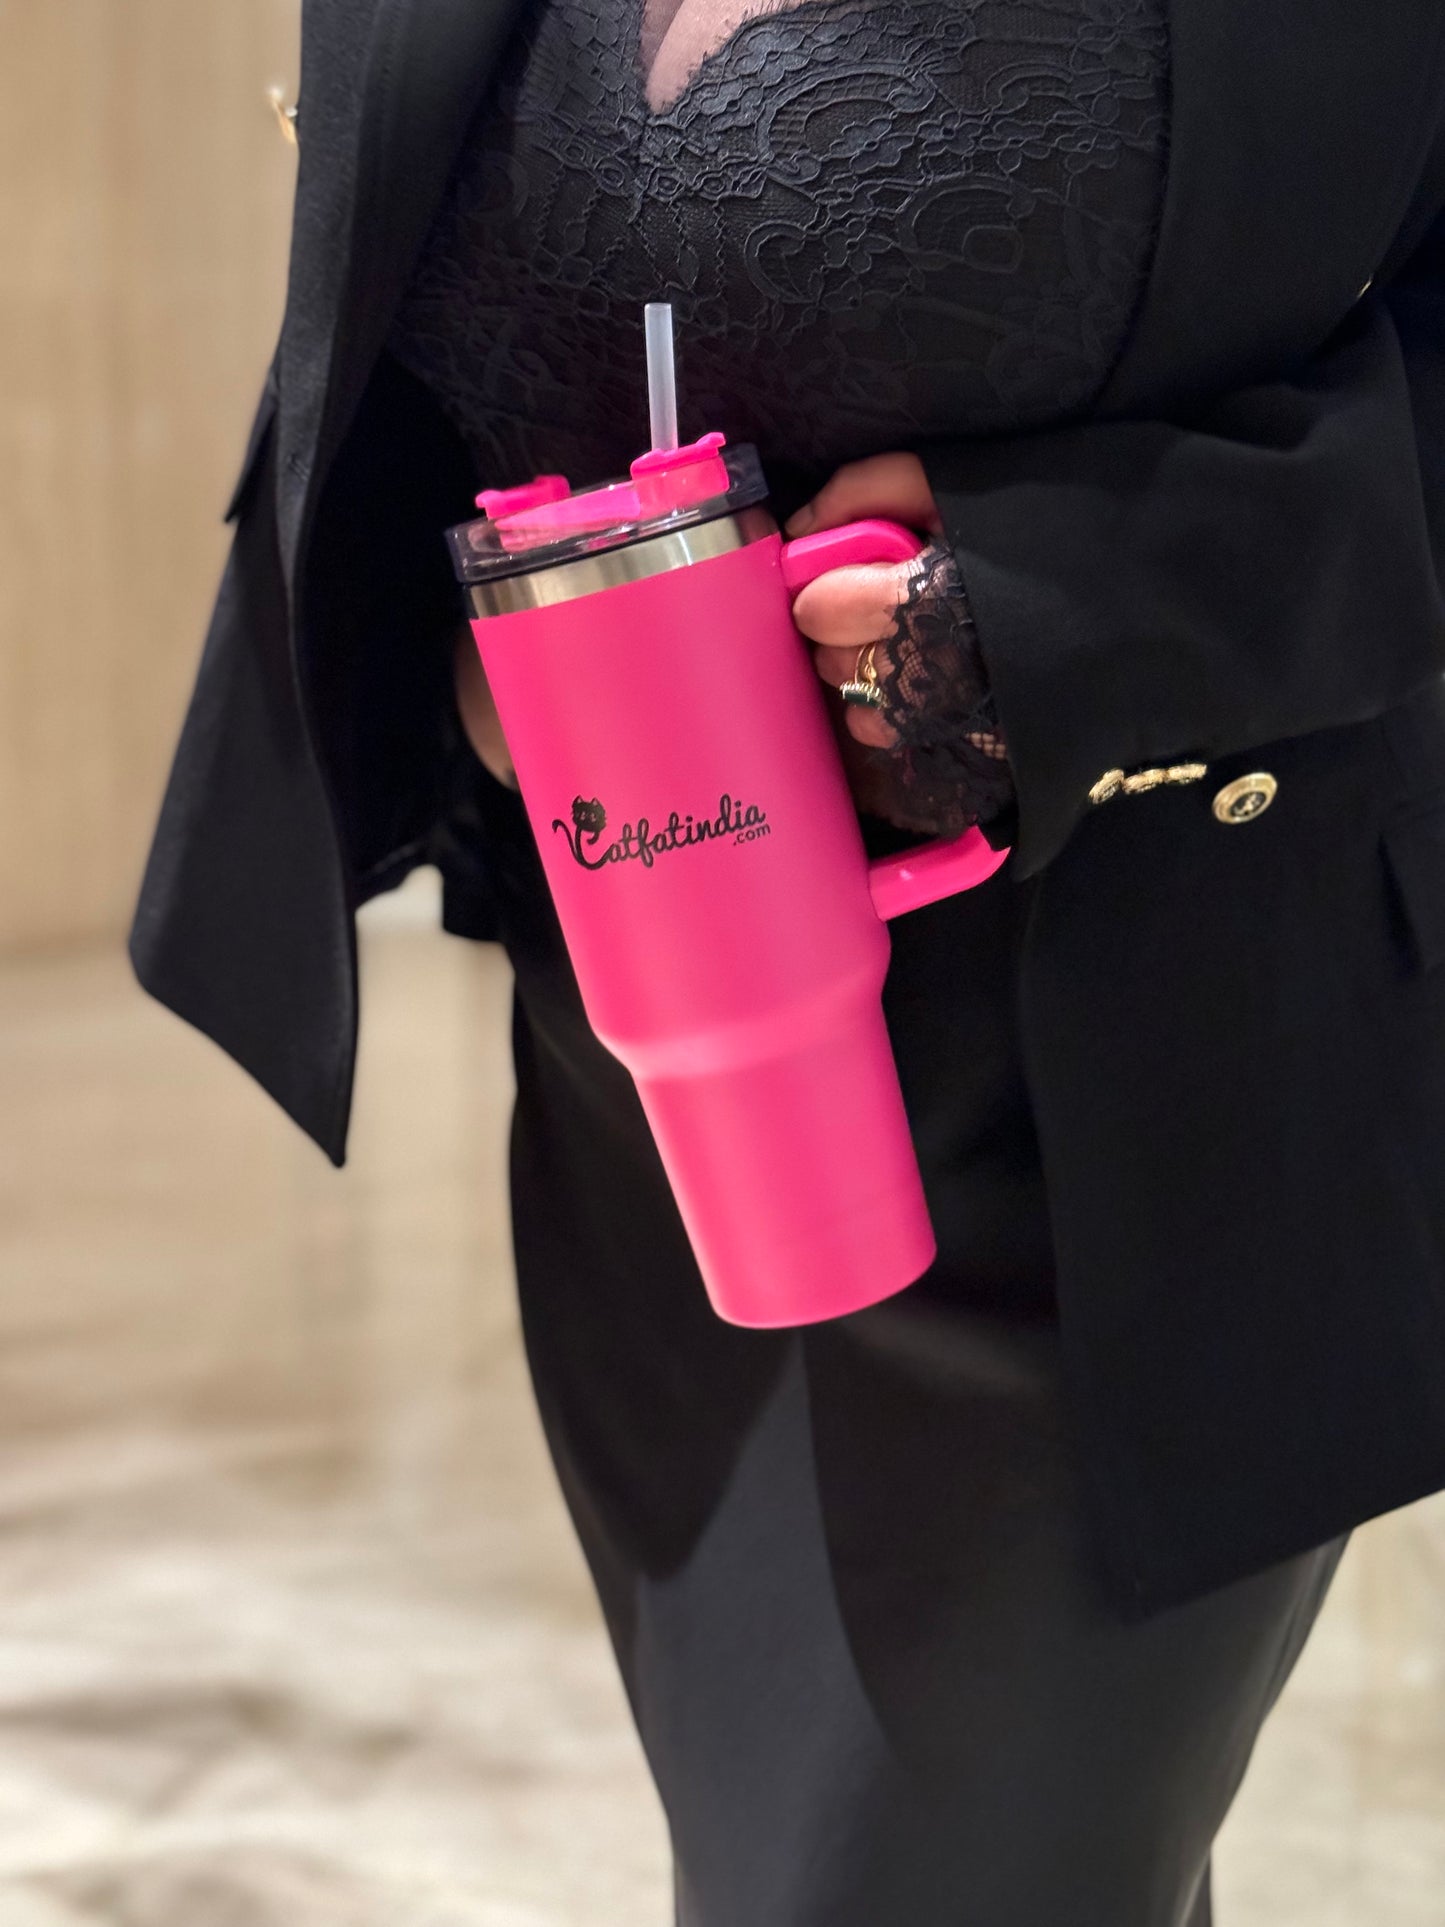 Couple Hydration Therapy Combo (Hot Pink & Black)